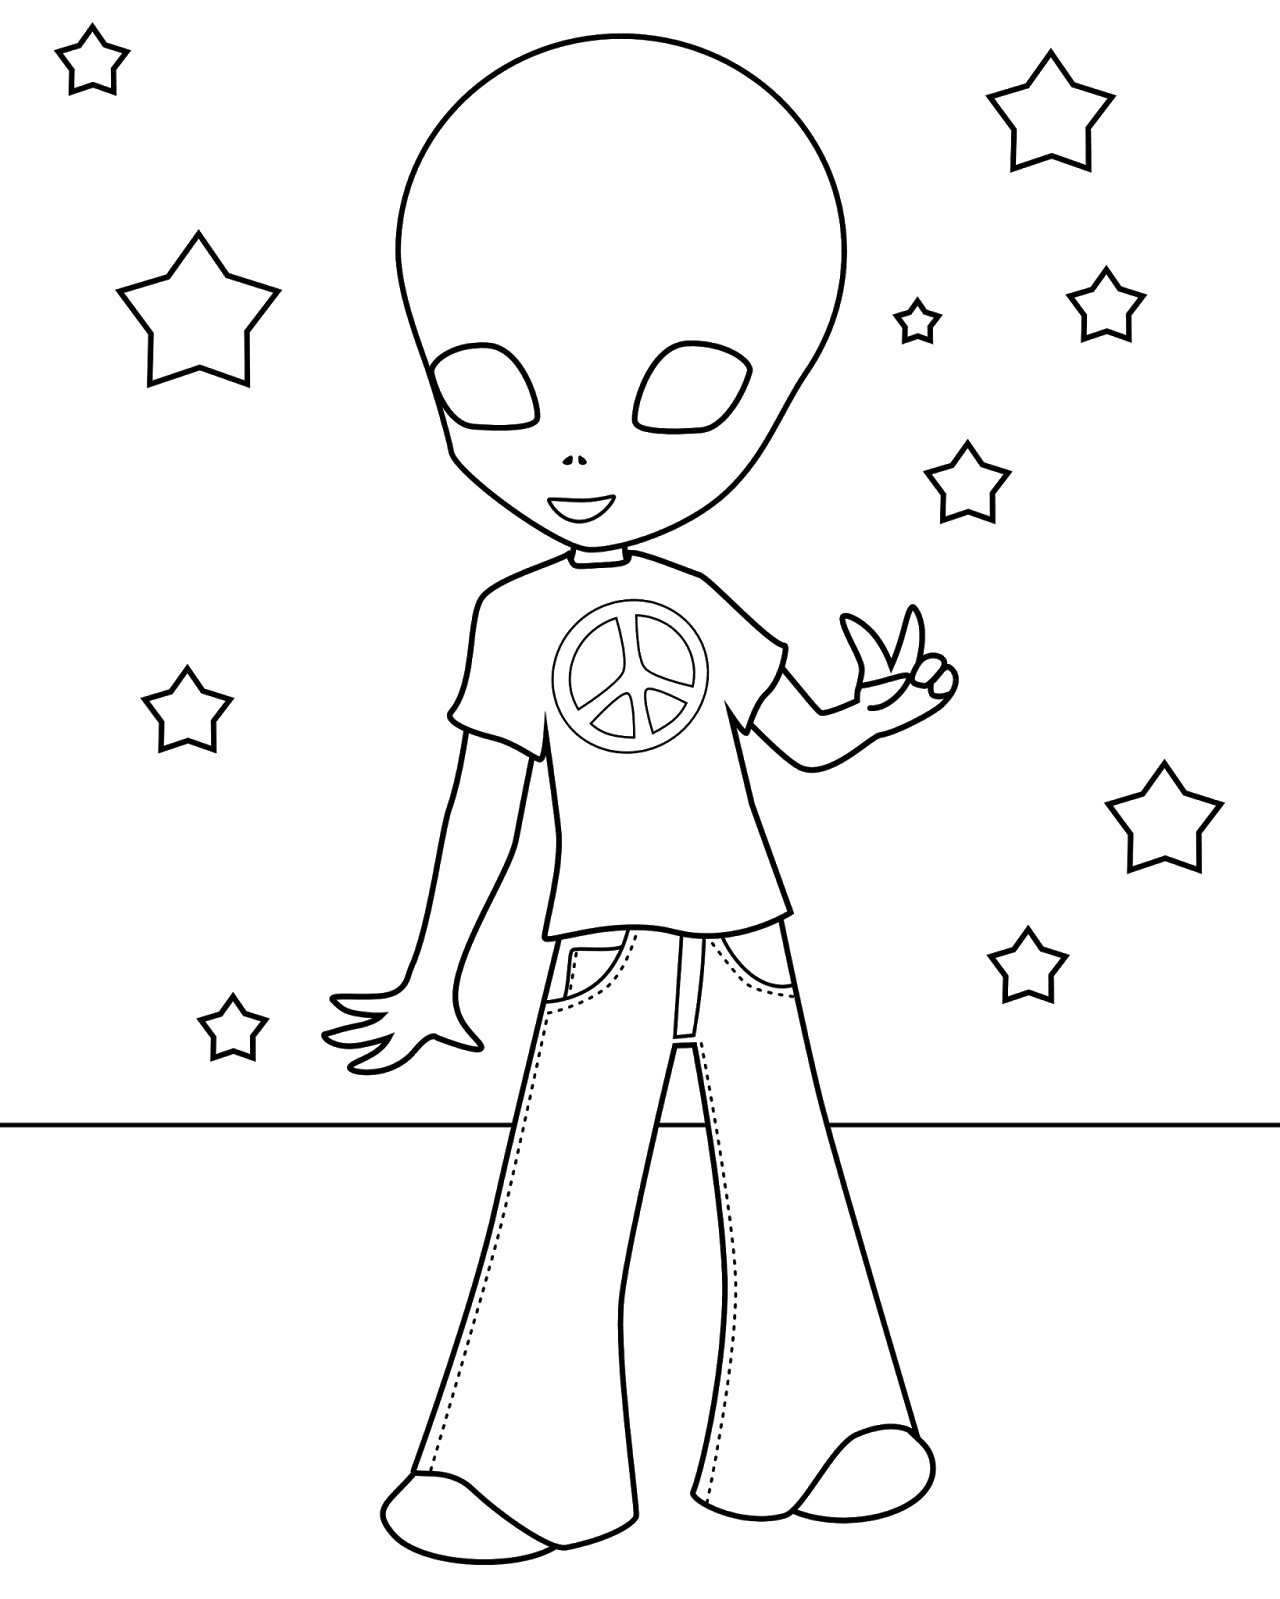 free-coloring-pages-of-aliens-alien-coloring-pages-alphabet-wp